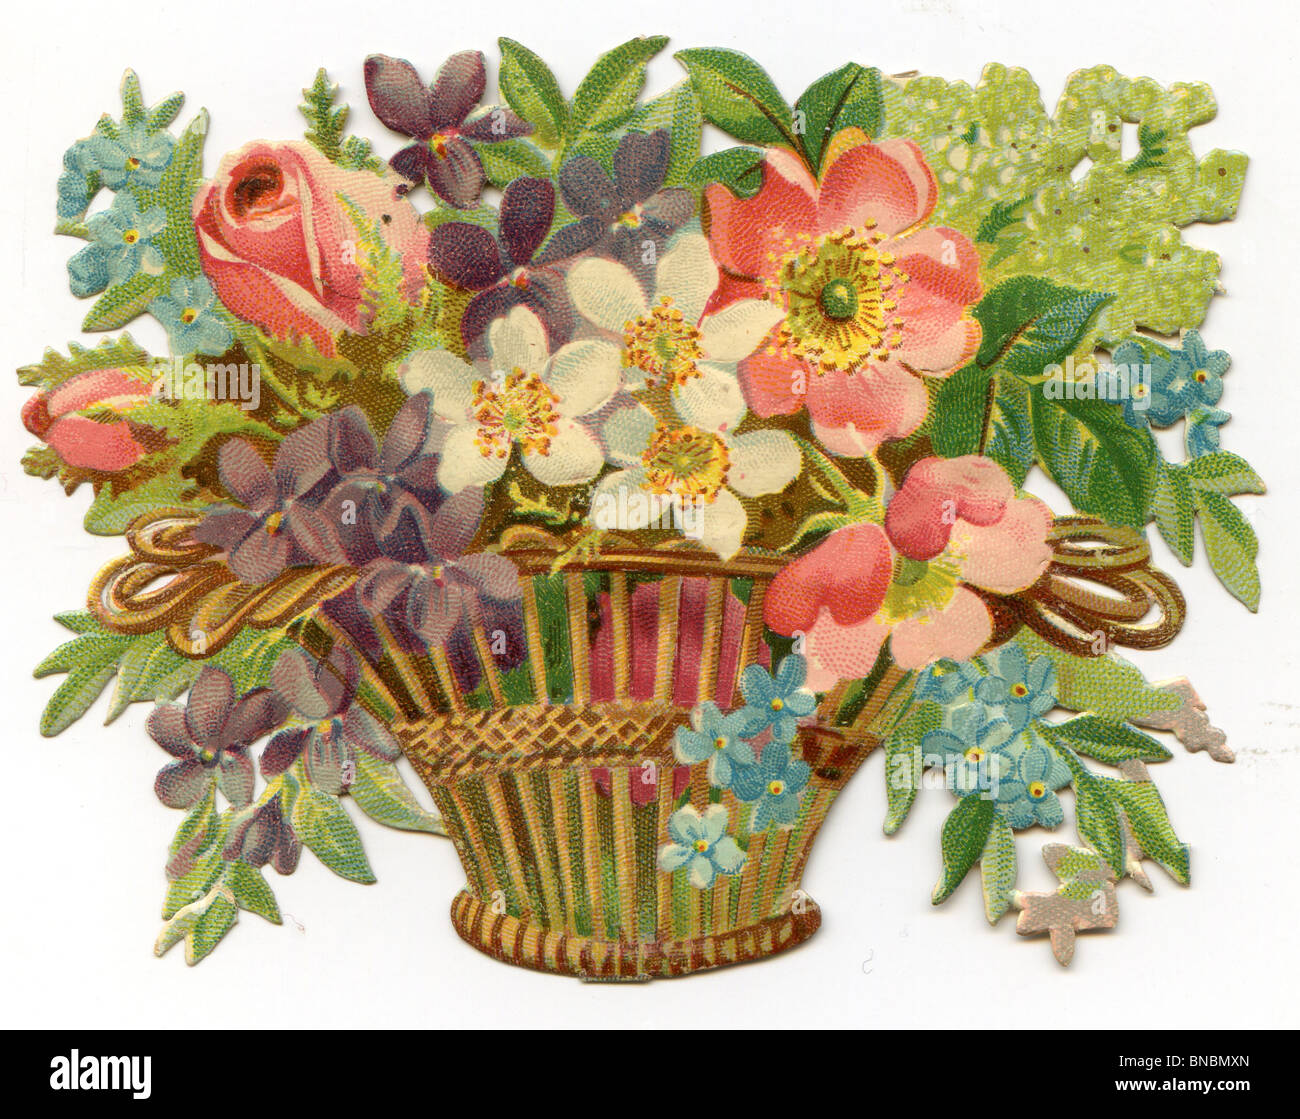 Basket of Roses, Violets and Forget-me-Nots Stock Photo